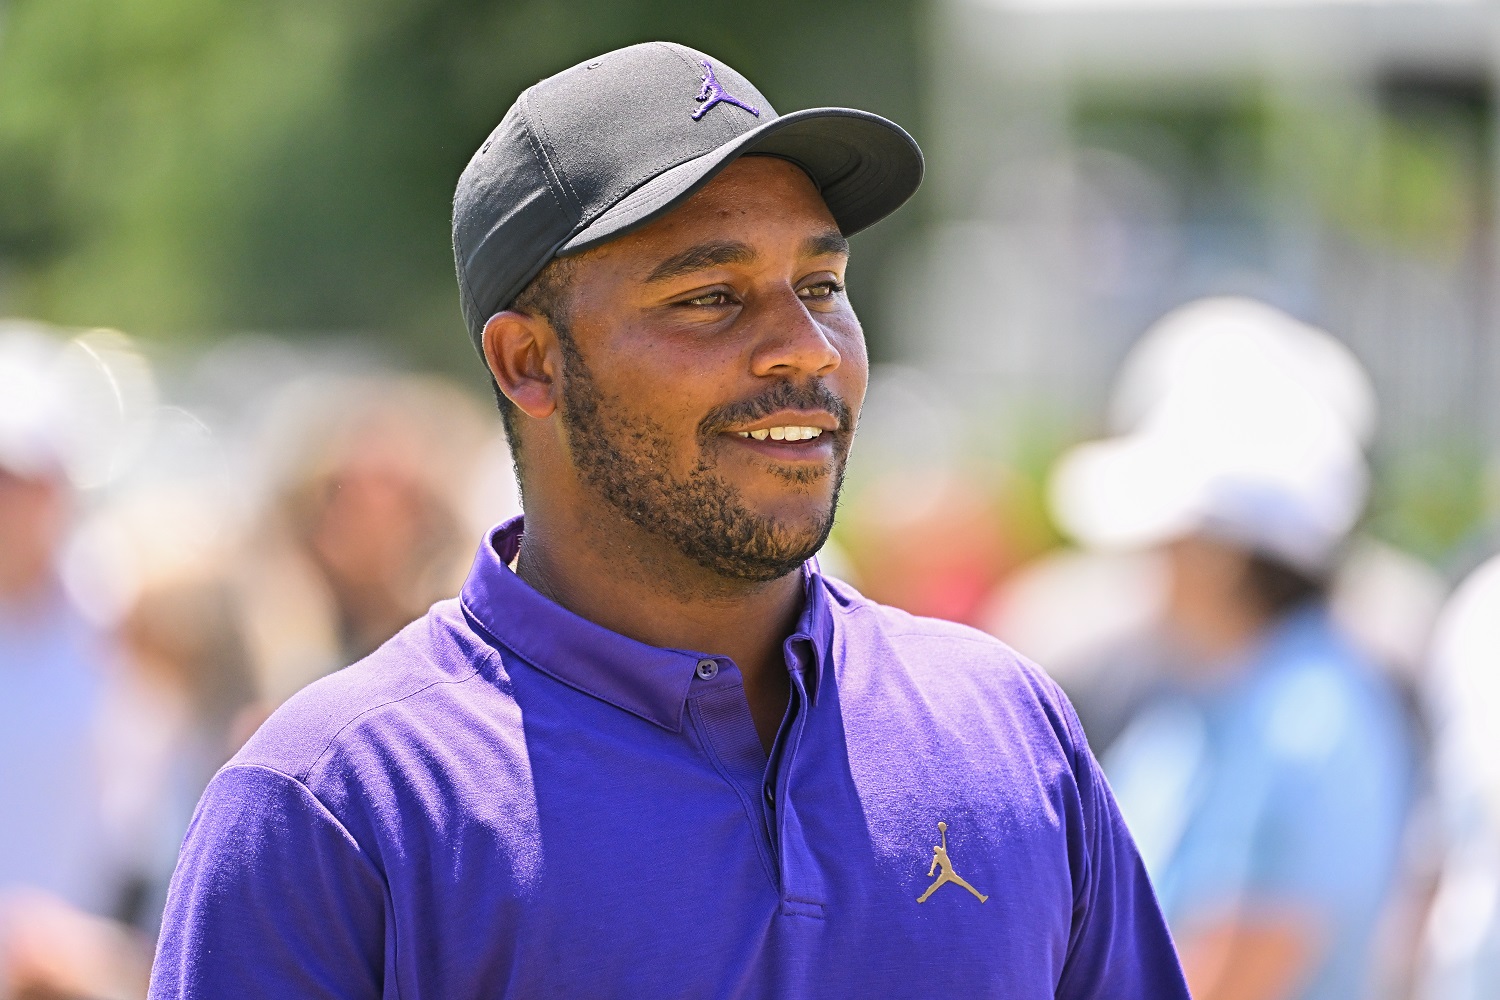 Harold Varner III walks on the 10th tee box during the final round of the Charles Schwab Challenge at Colonial Country Club on May 29, 2022.